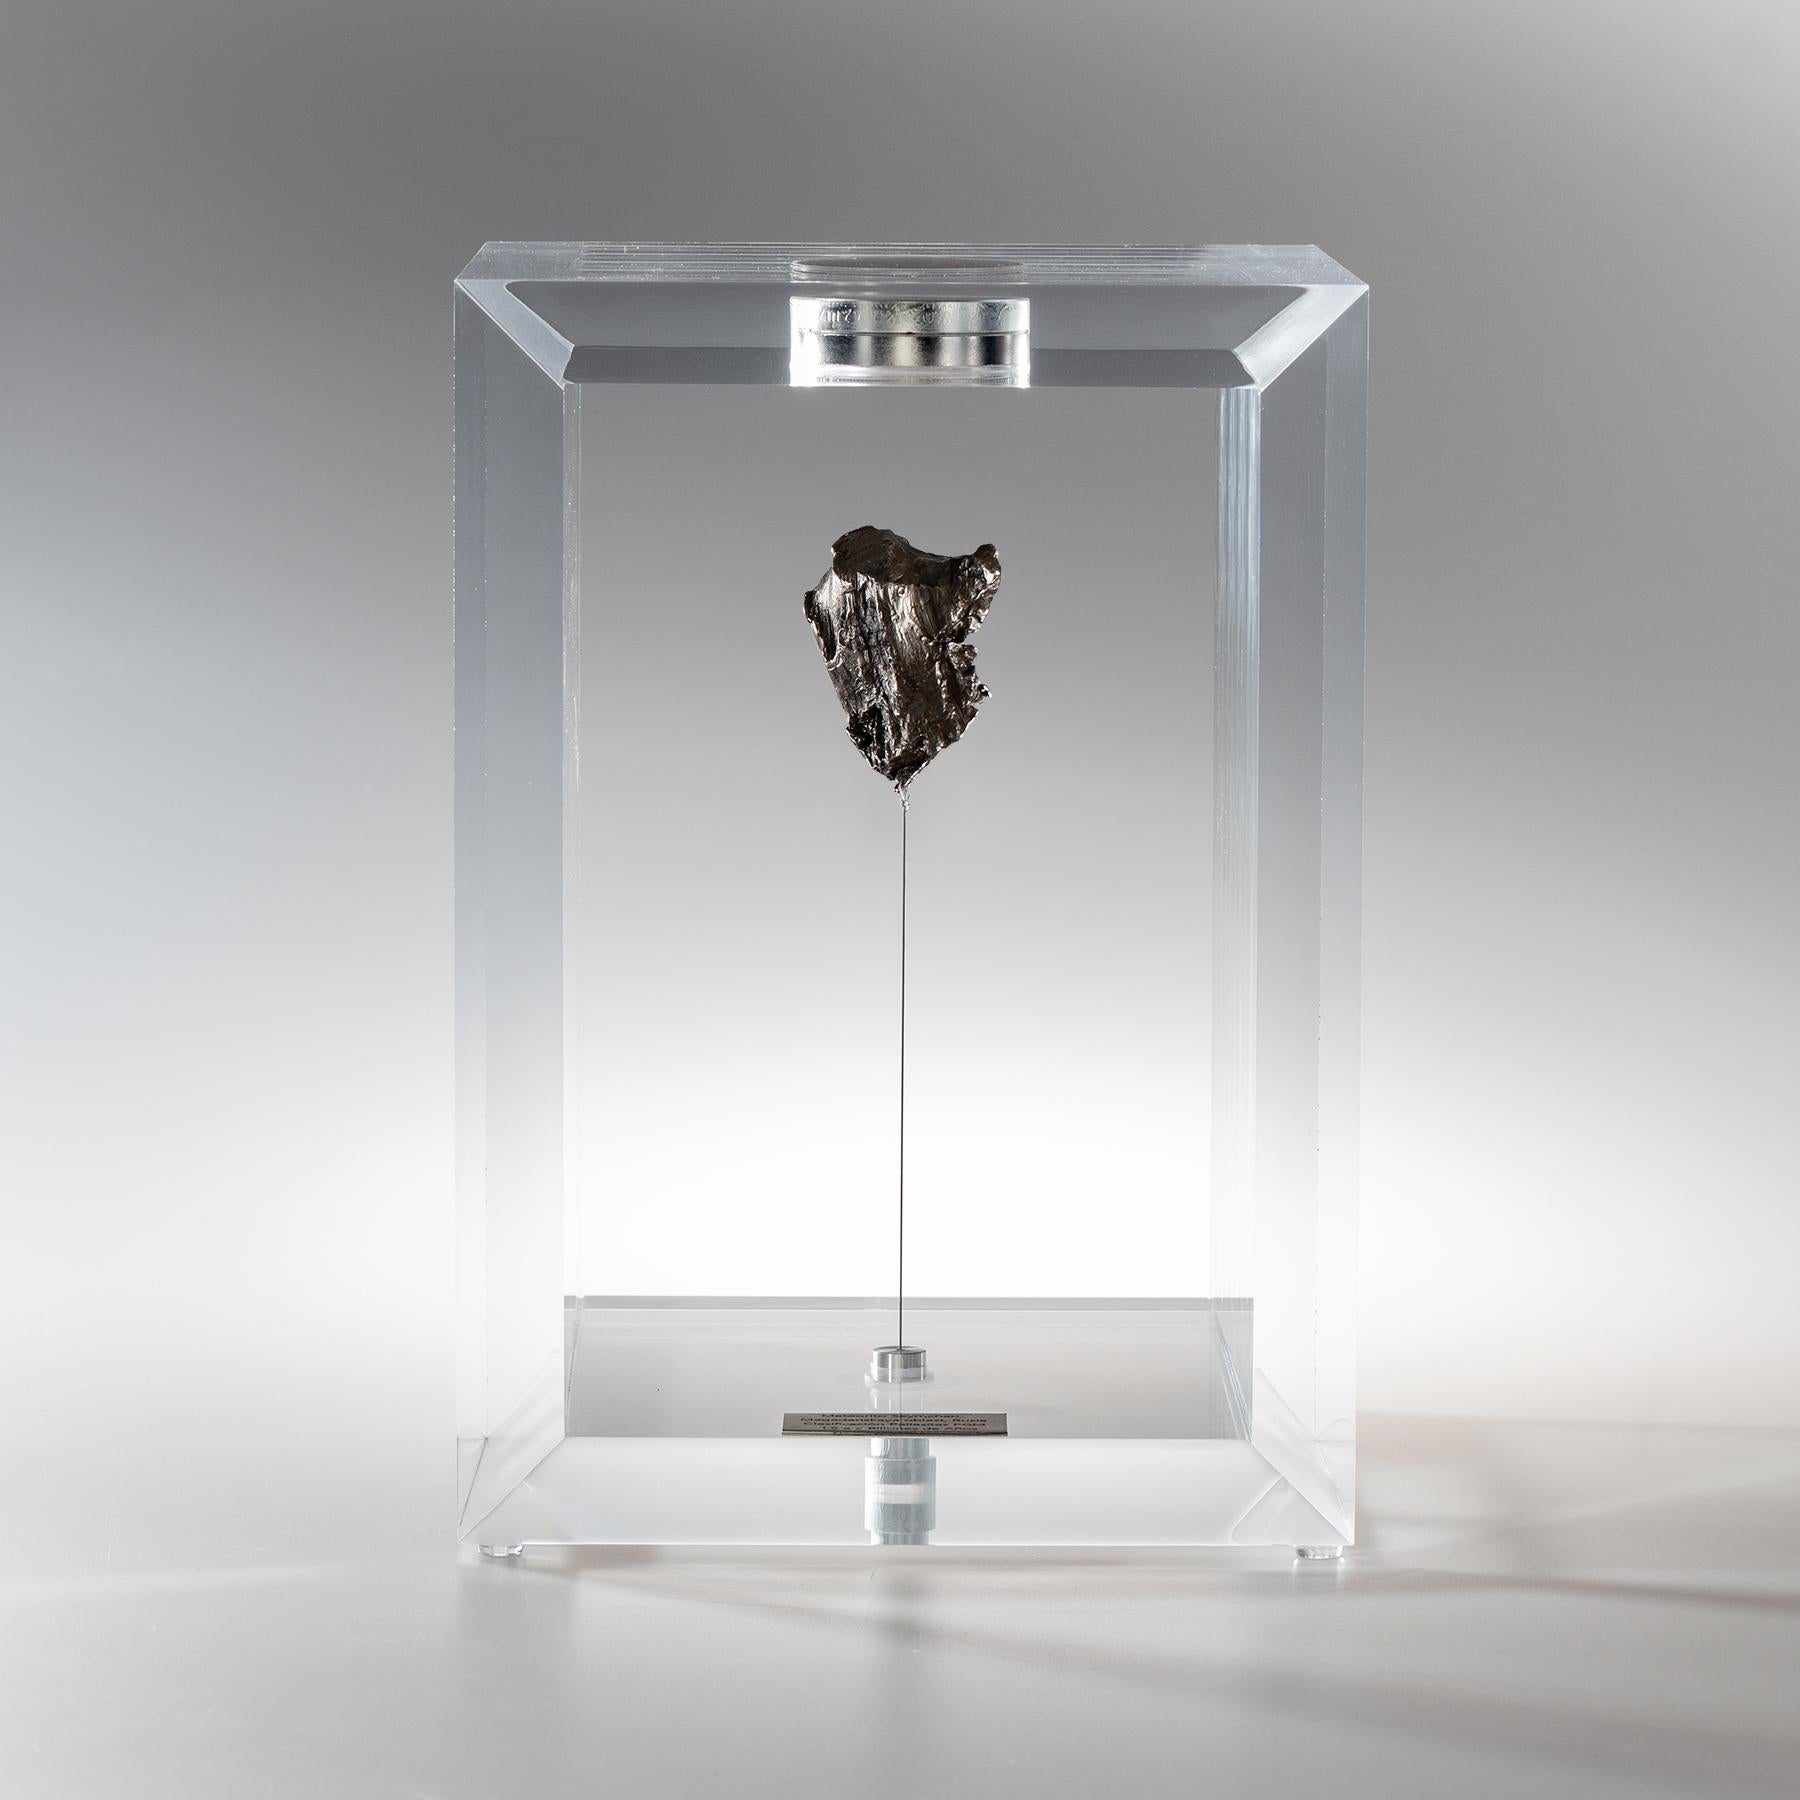 The “Space Box” was designed by Ernesto Duran, as a creative way to enhance the uniqueness of meteorites and could also be used as a decorative piece. It´s an acrylic box with a magnet on top and a steel string pulling the meteorite straight